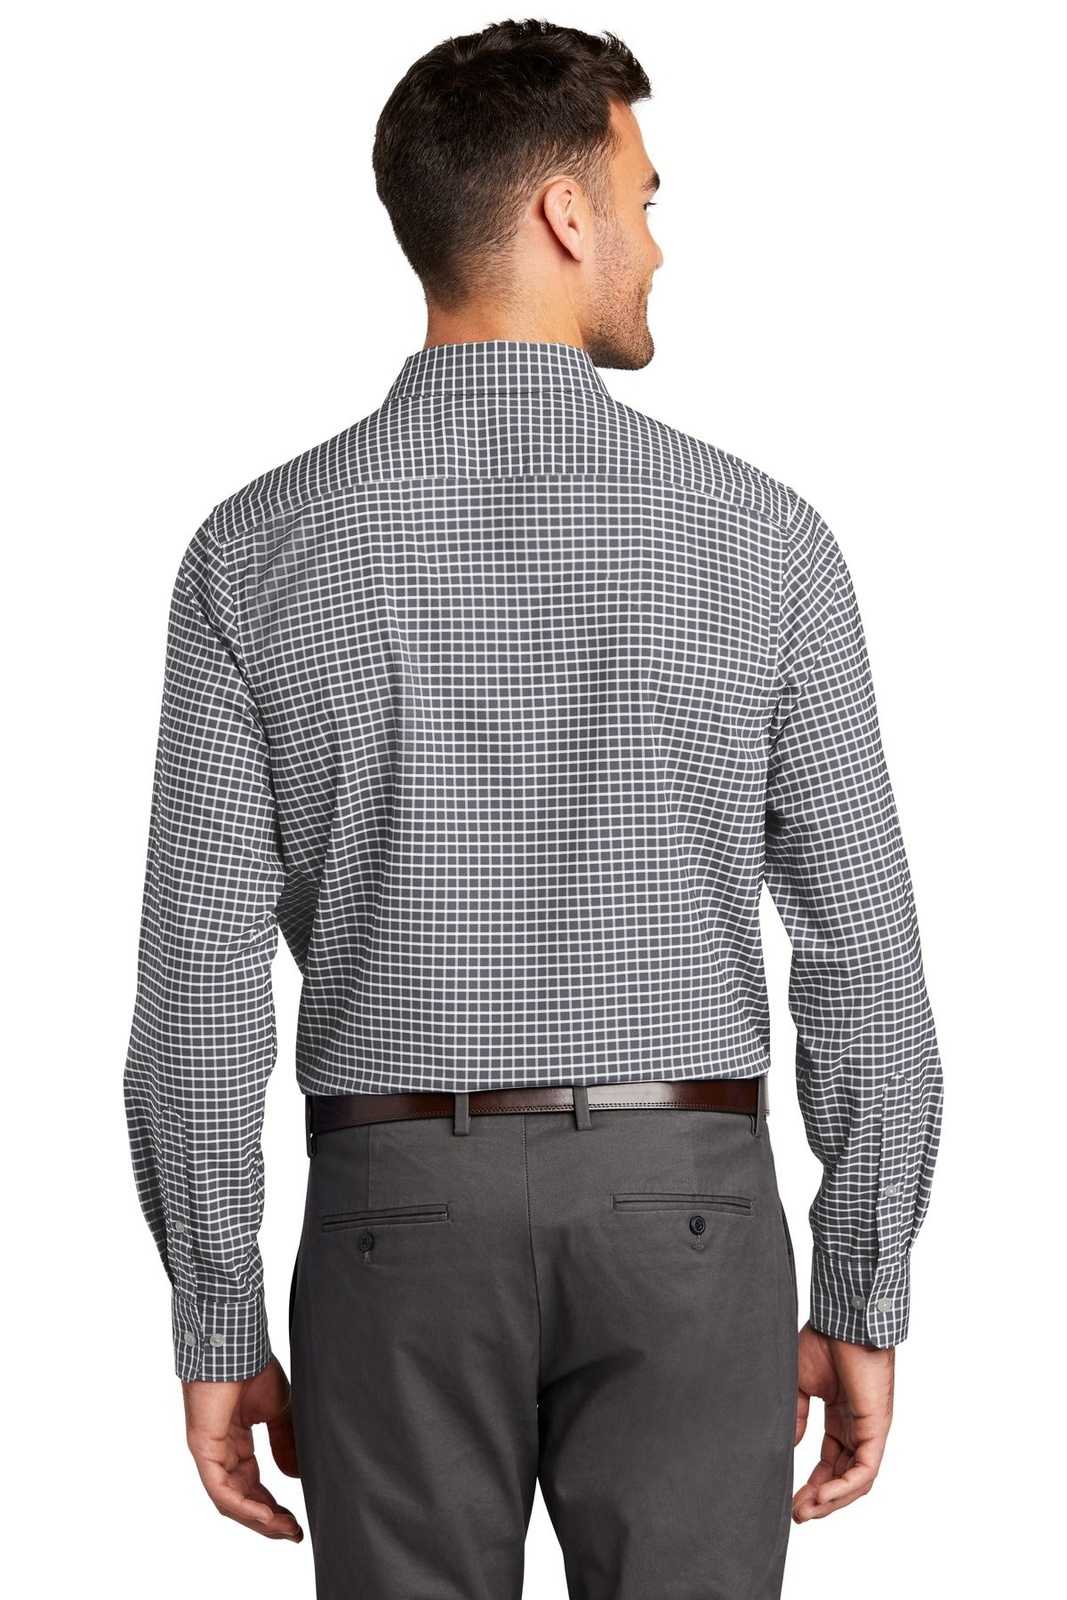 Port Authority W680 City Stretch Shirt - Graphite White - HIT a Double - 2